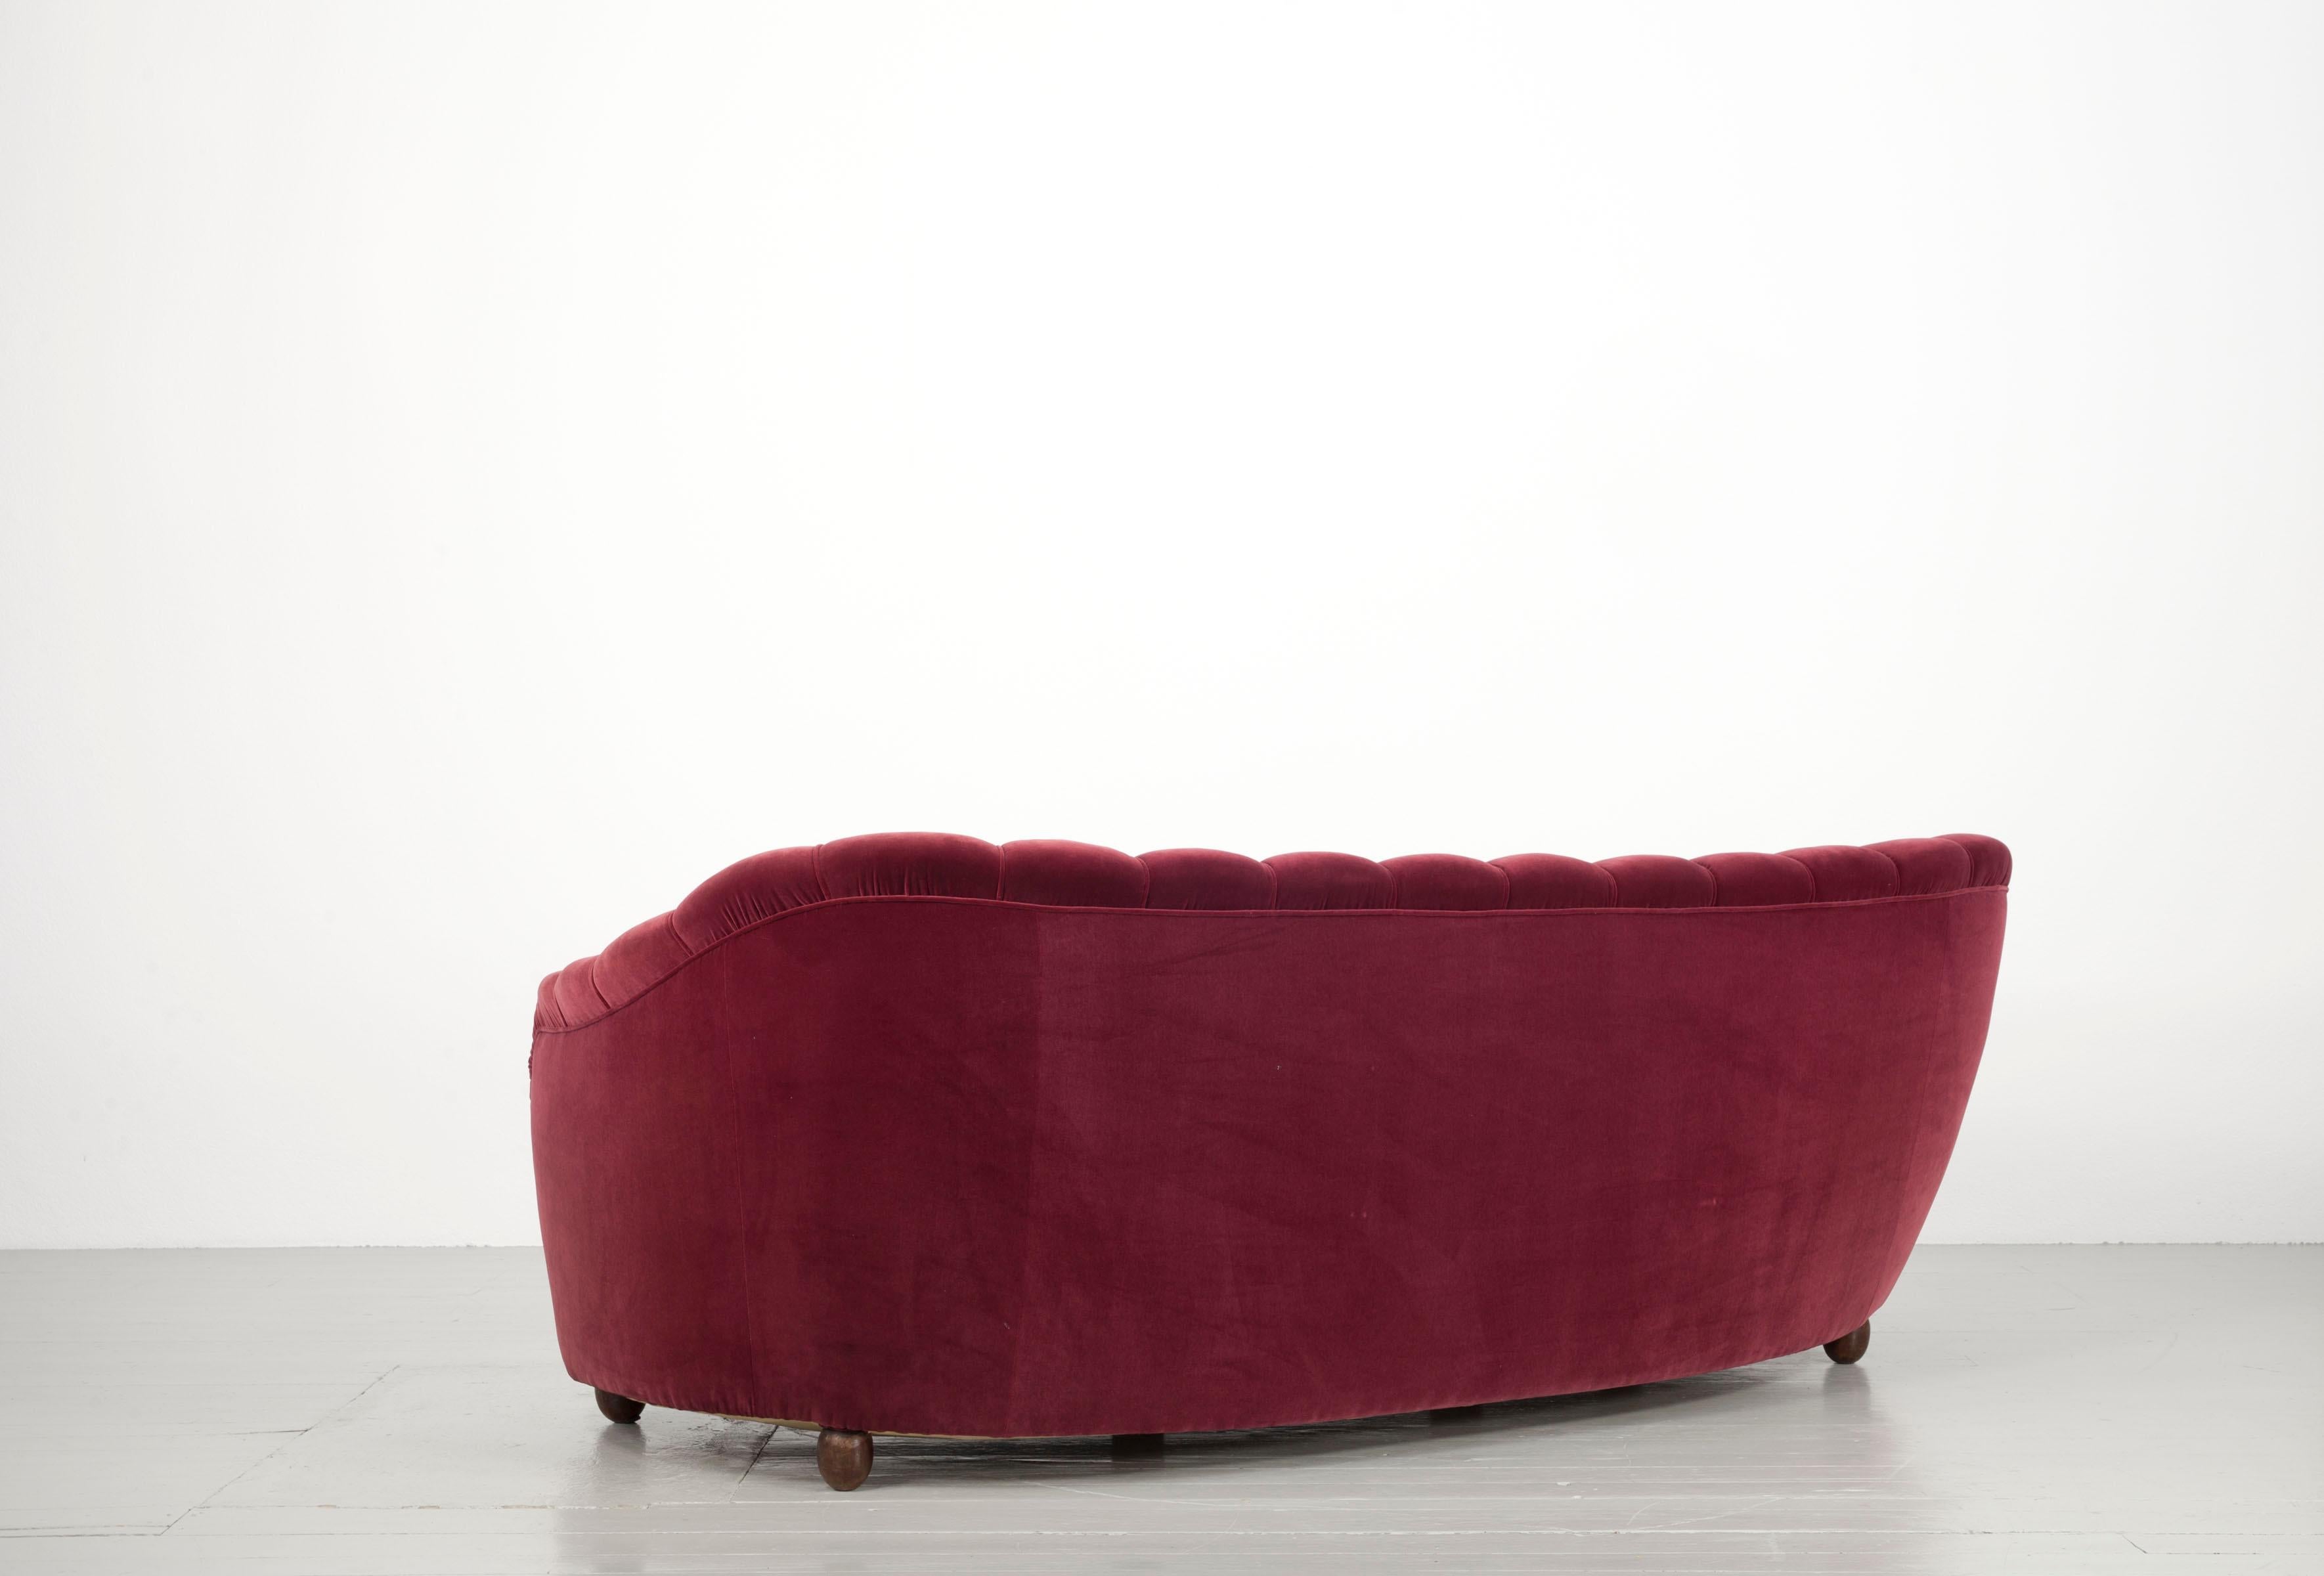 Italian Set of a Massive Sofa and Two Armchairs in Dark Red Velvet Cover, 1940s For Sale 9